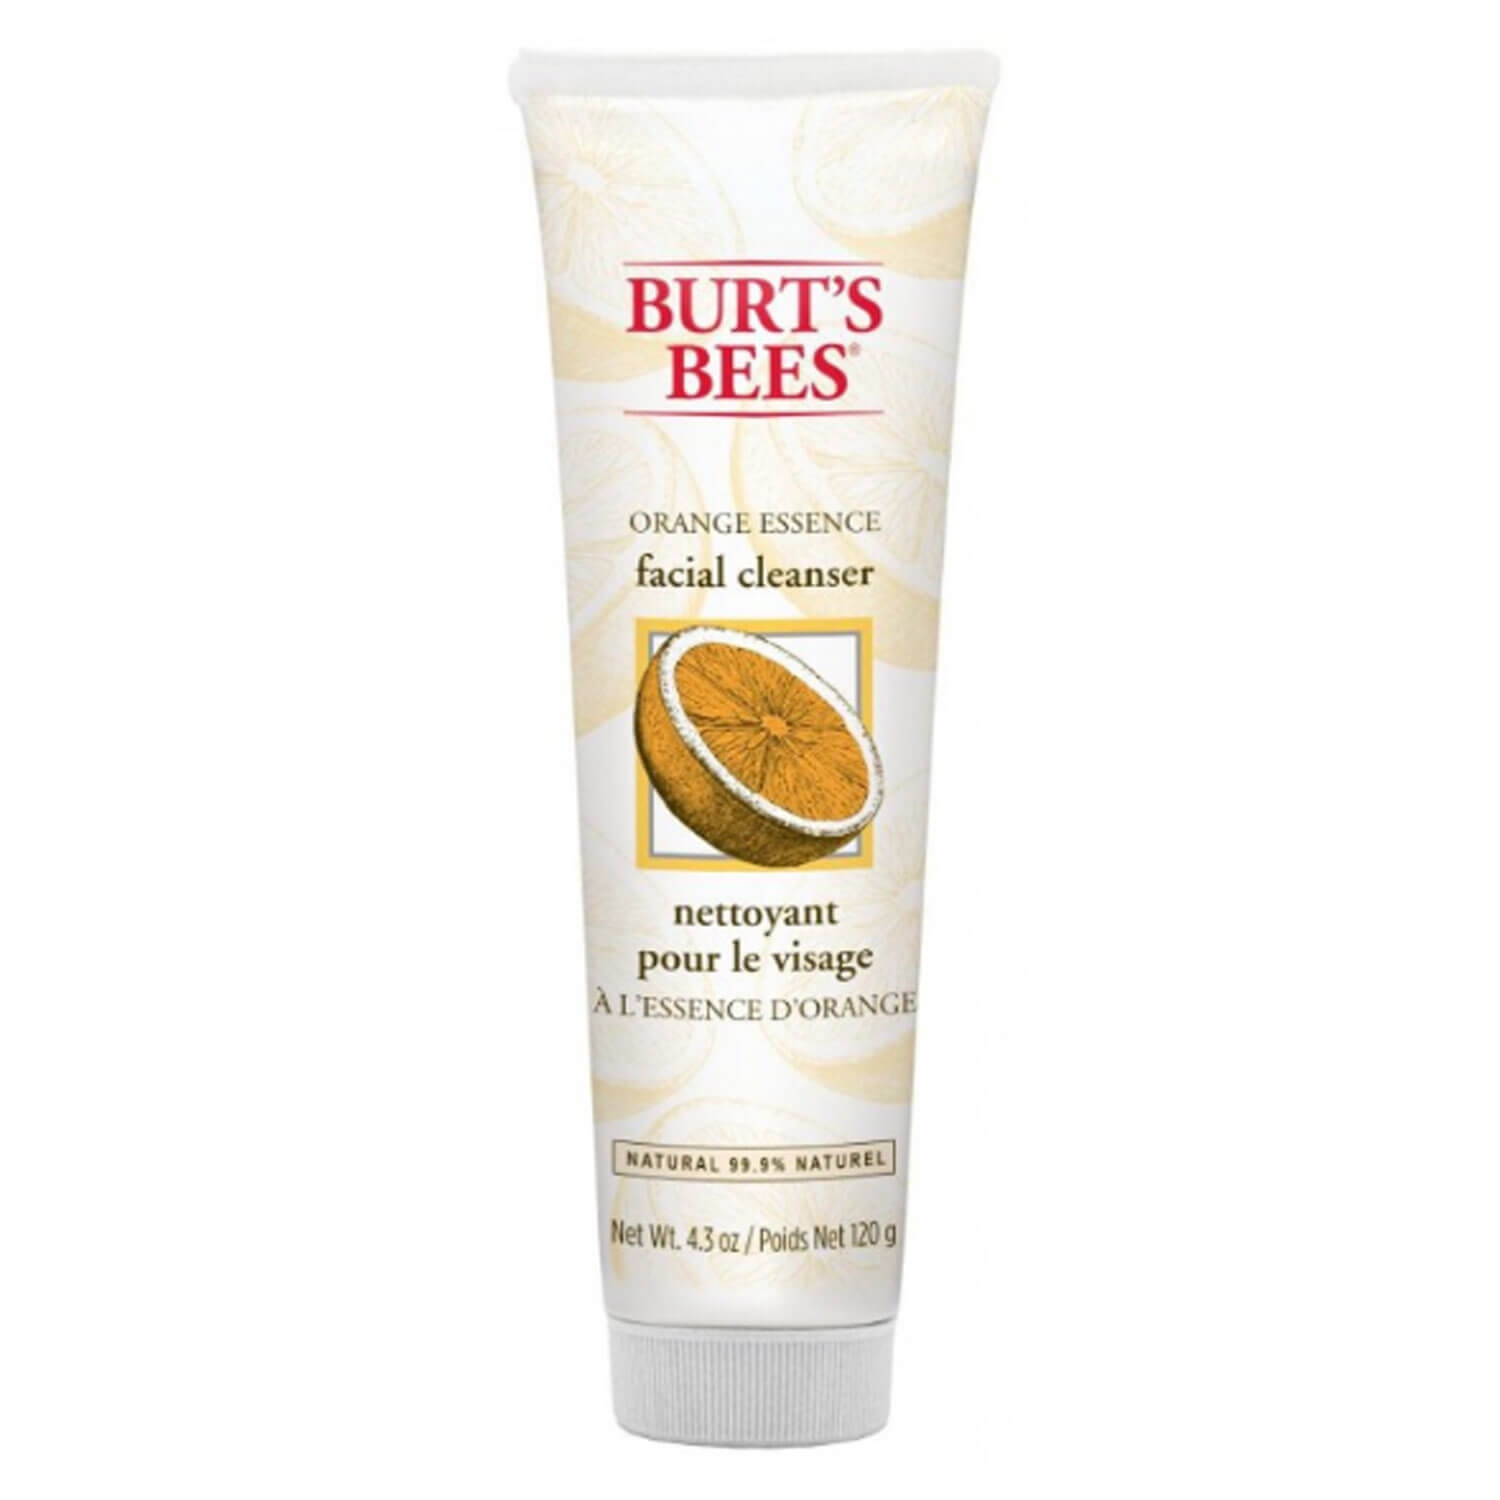 Product image from Burt's Bees - Facial Cleanser Orange Essence